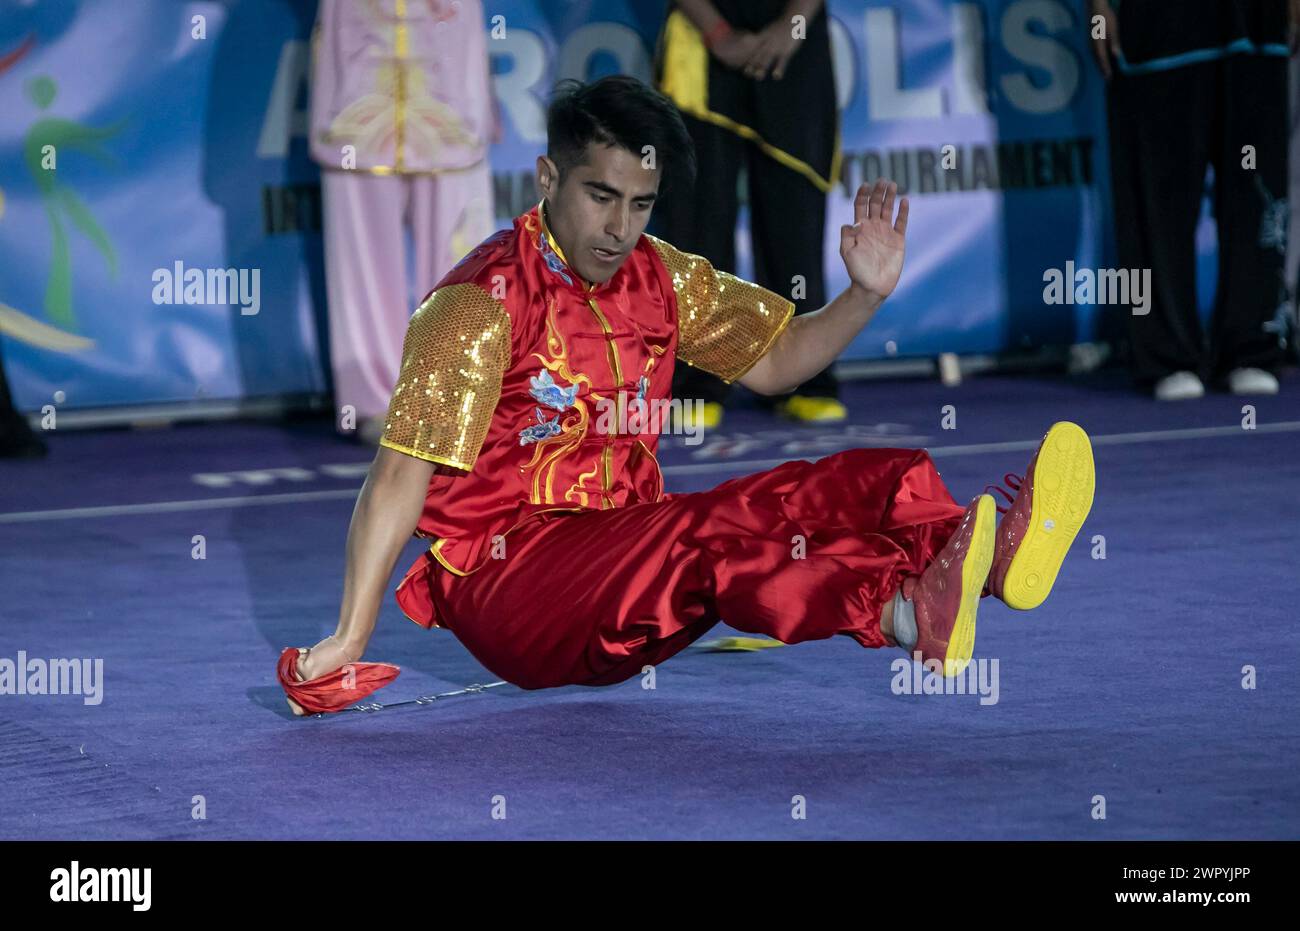 Greece, Greece. 9th Mar, 2024. An athlete performs during the opening ceremony of the Acropolis-Forbidden City International Wushu Tournament in Athens, Greece, on March 9, 2024. Credit: Panagiotis Moschandreou/Xinhua/Alamy Live News Stock Photo